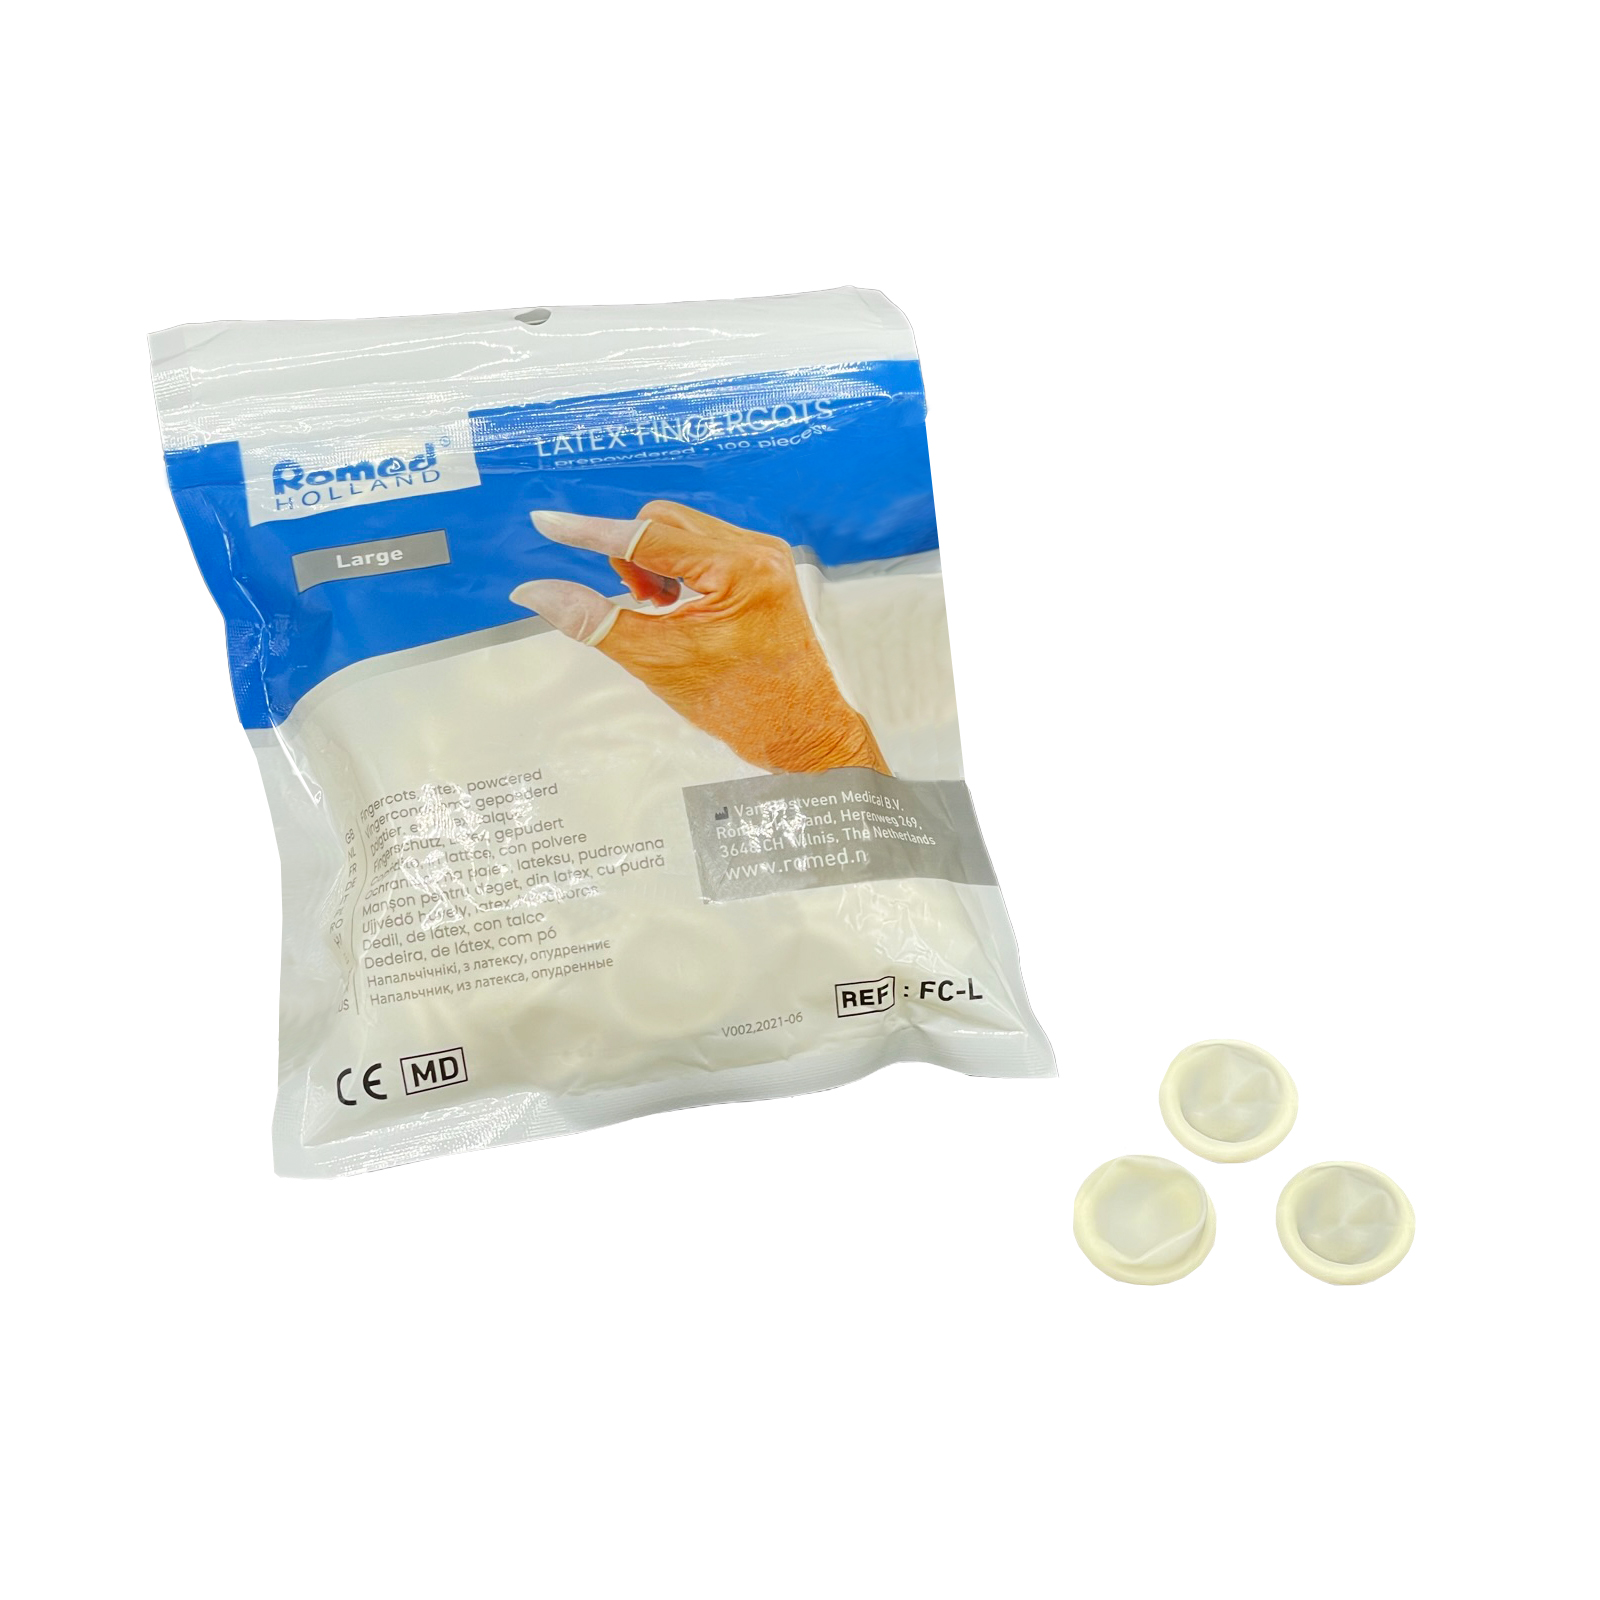 FC-S Romed finger cots, latex, prepowdered, small, 100 pcs in a polybag, 250 x 100 pcs = 25.000 pcs in a carton